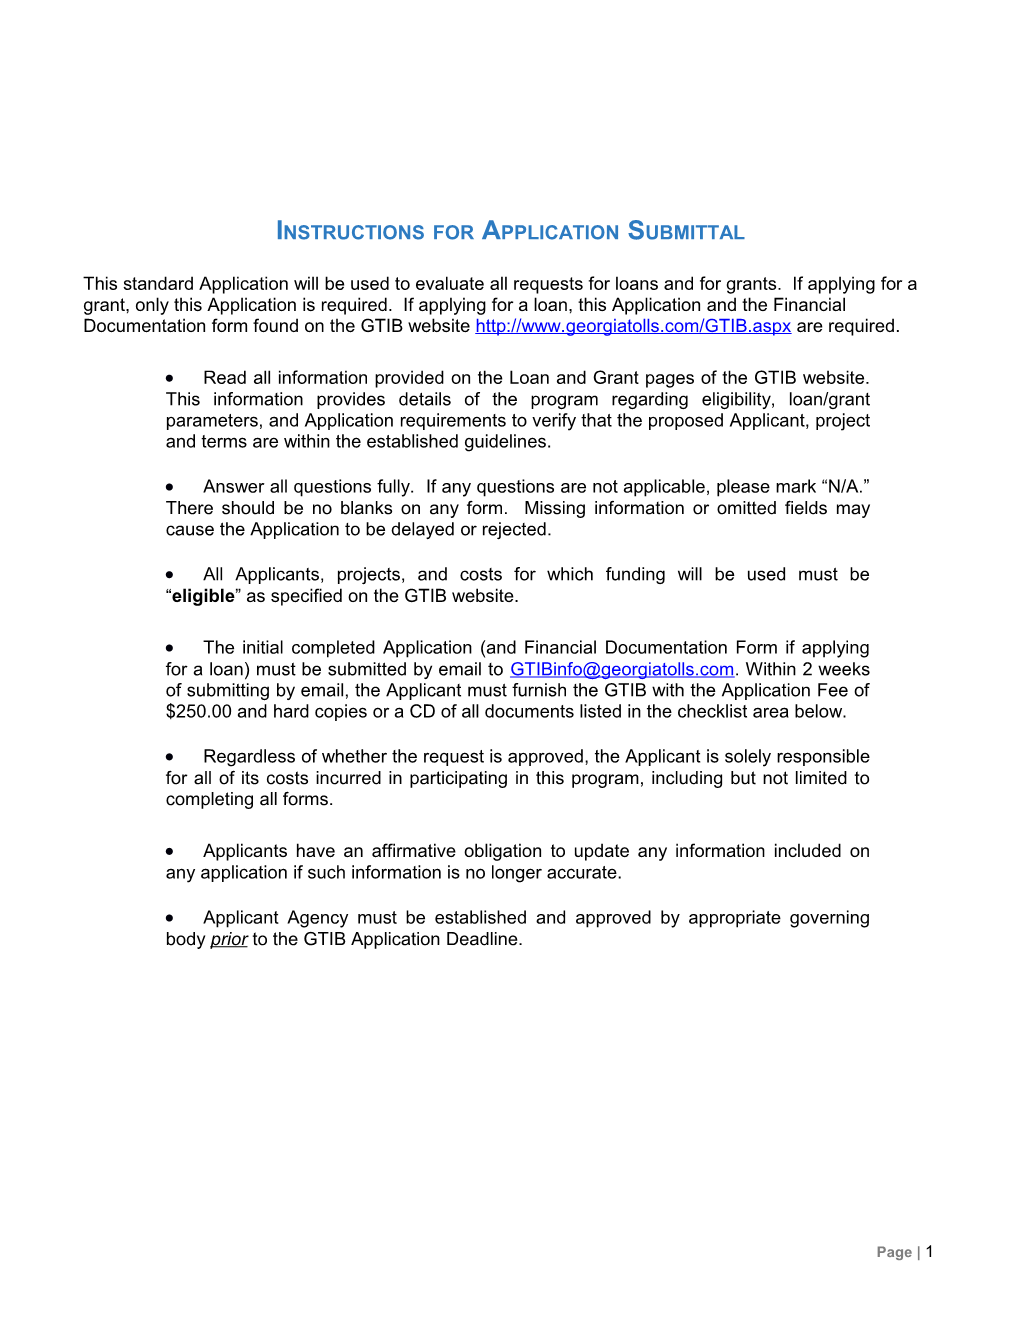 Instructions for Application Submittal